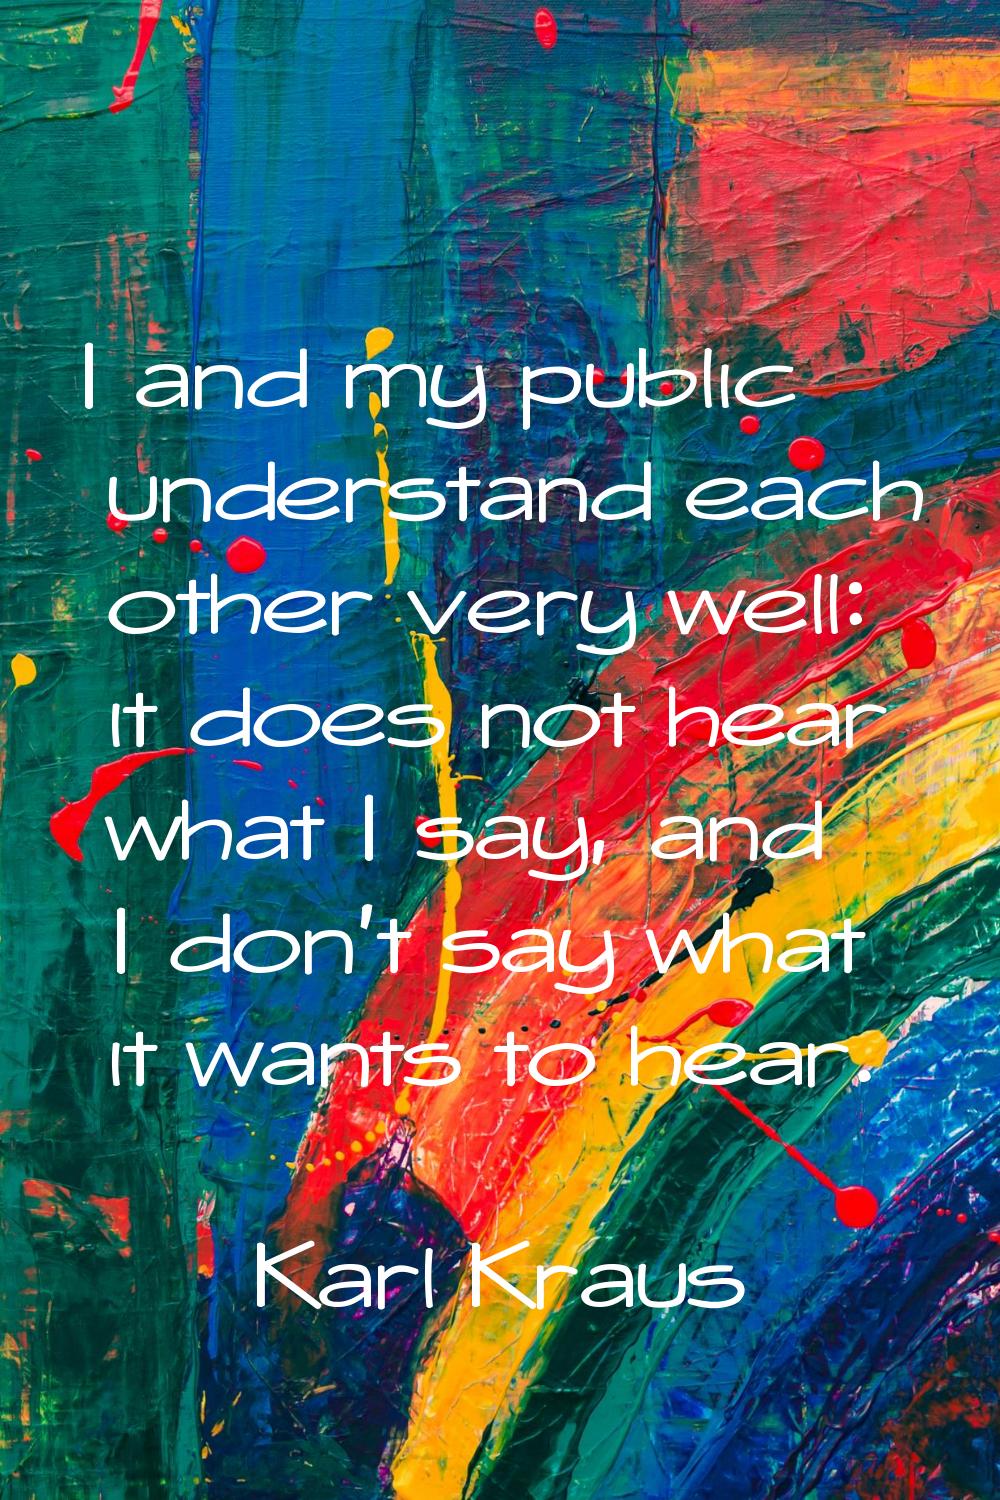 I and my public understand each other very well: it does not hear what I say, and I don't say what 